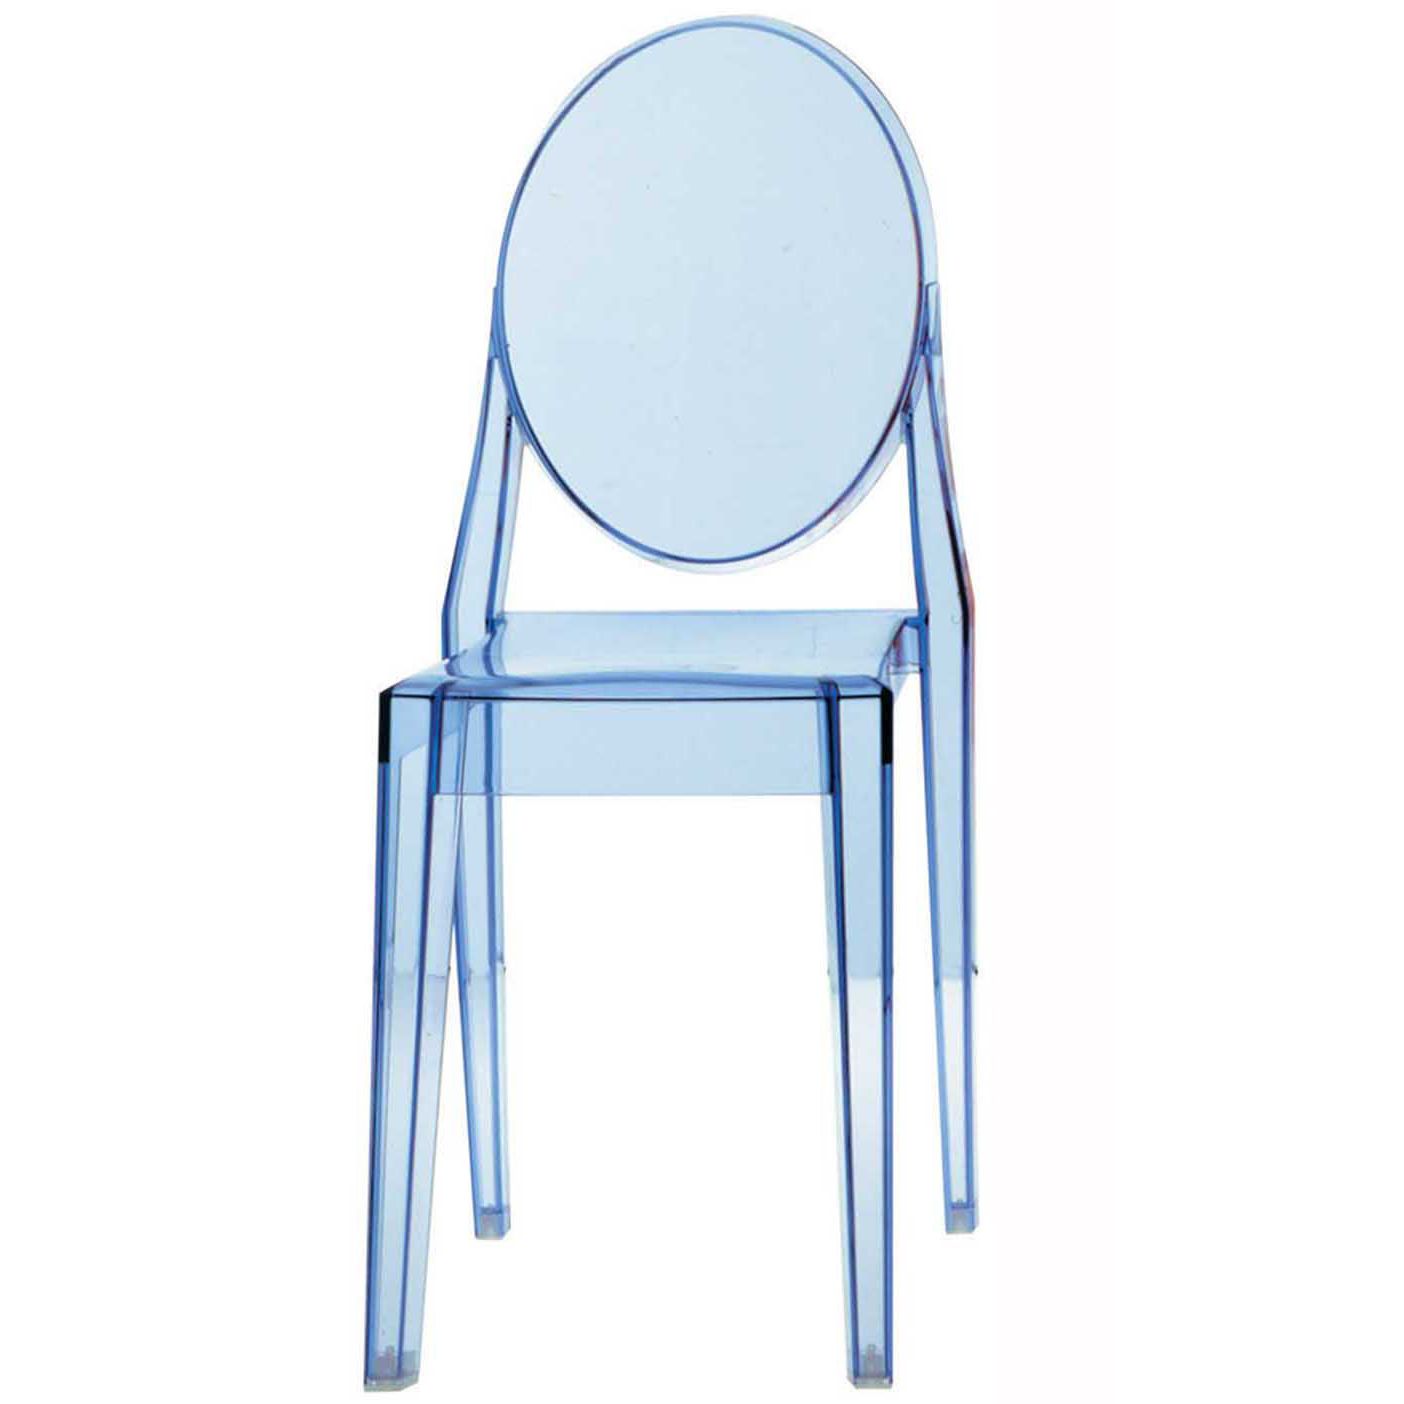 Philippe Starck for Kartell Victoria Ghost Chair, Light Blue, Pair at John Lewis